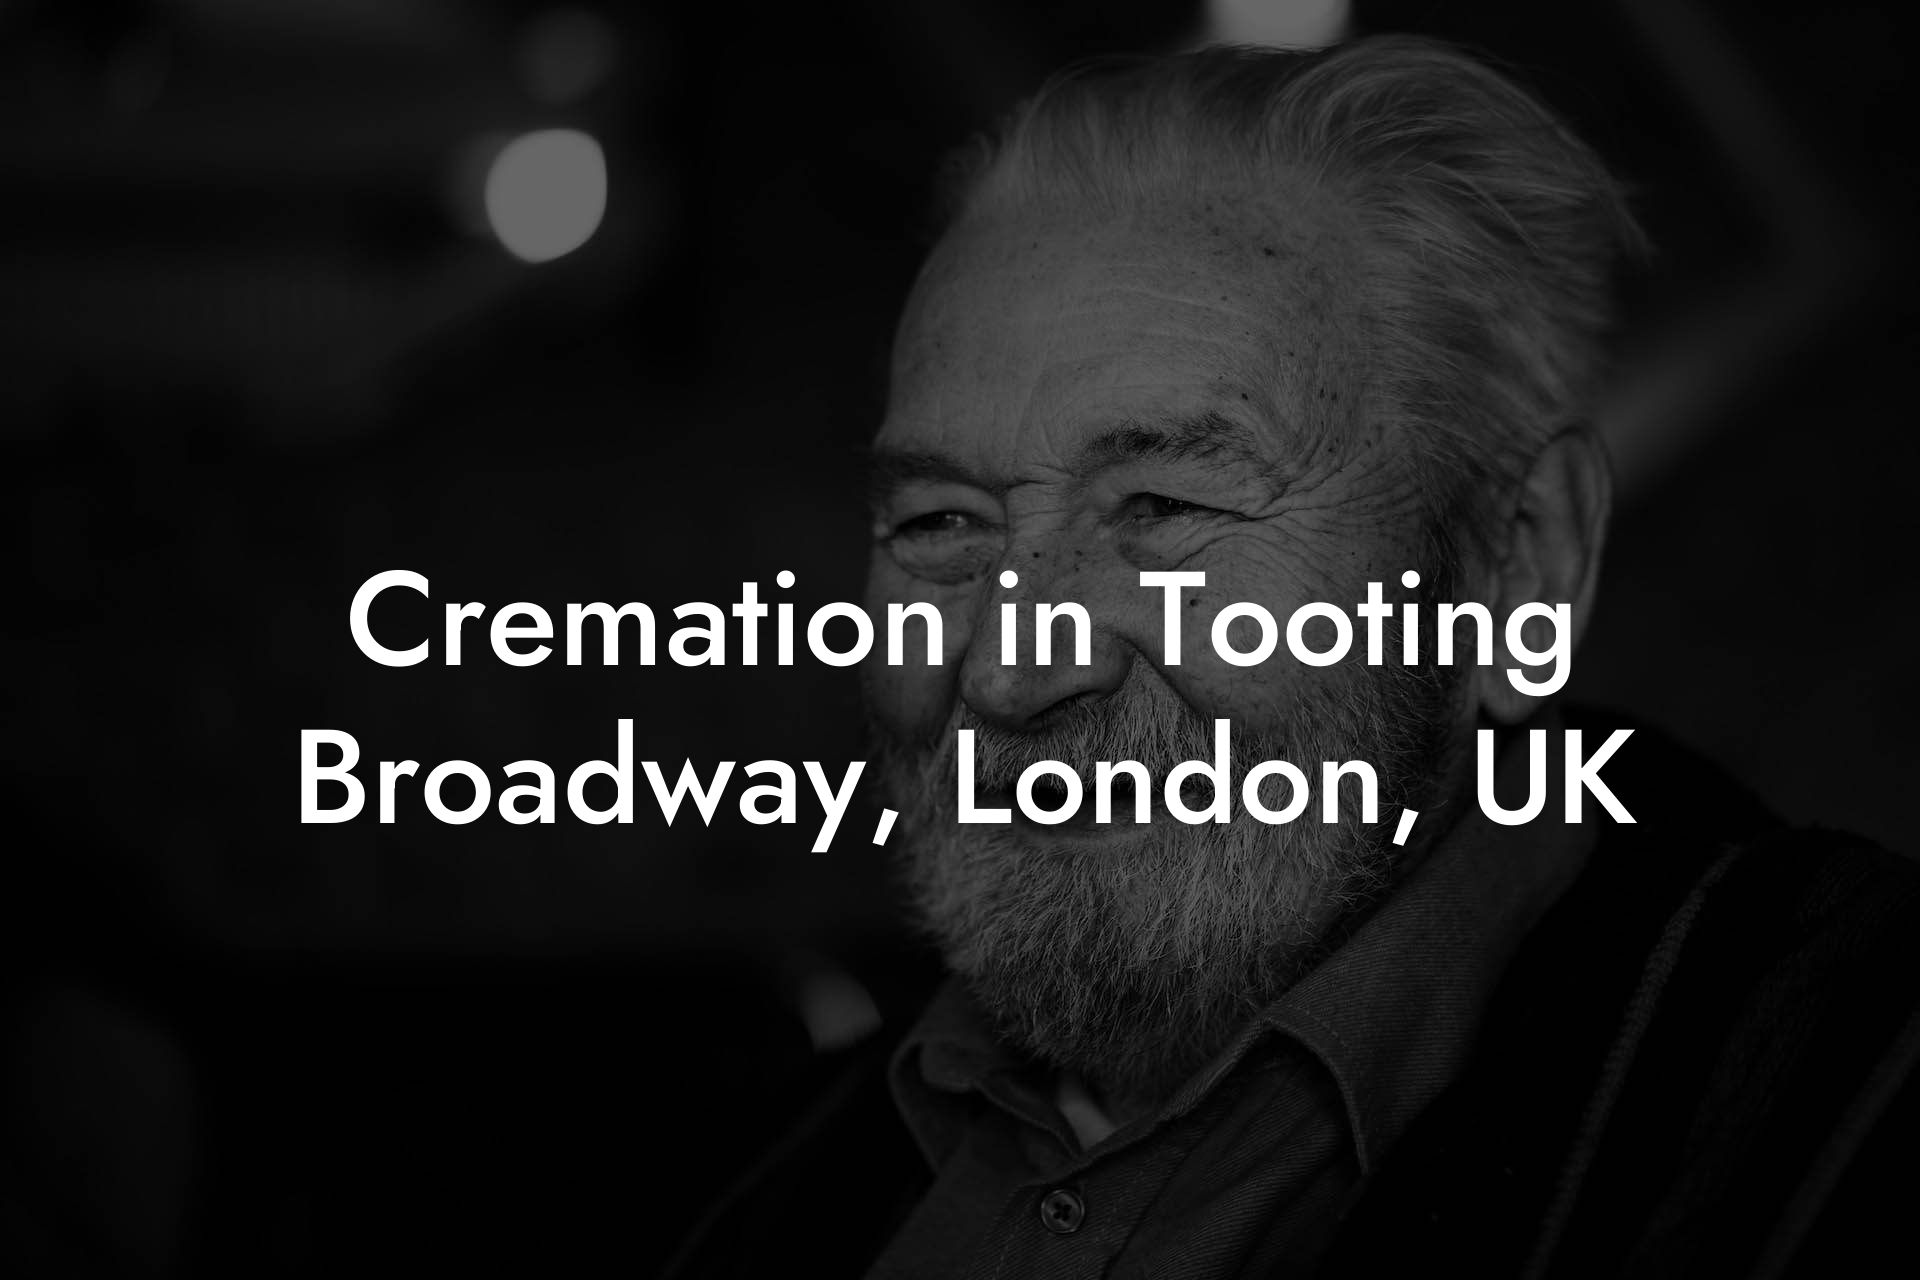 Cremation in Tooting Broadway, London, UK